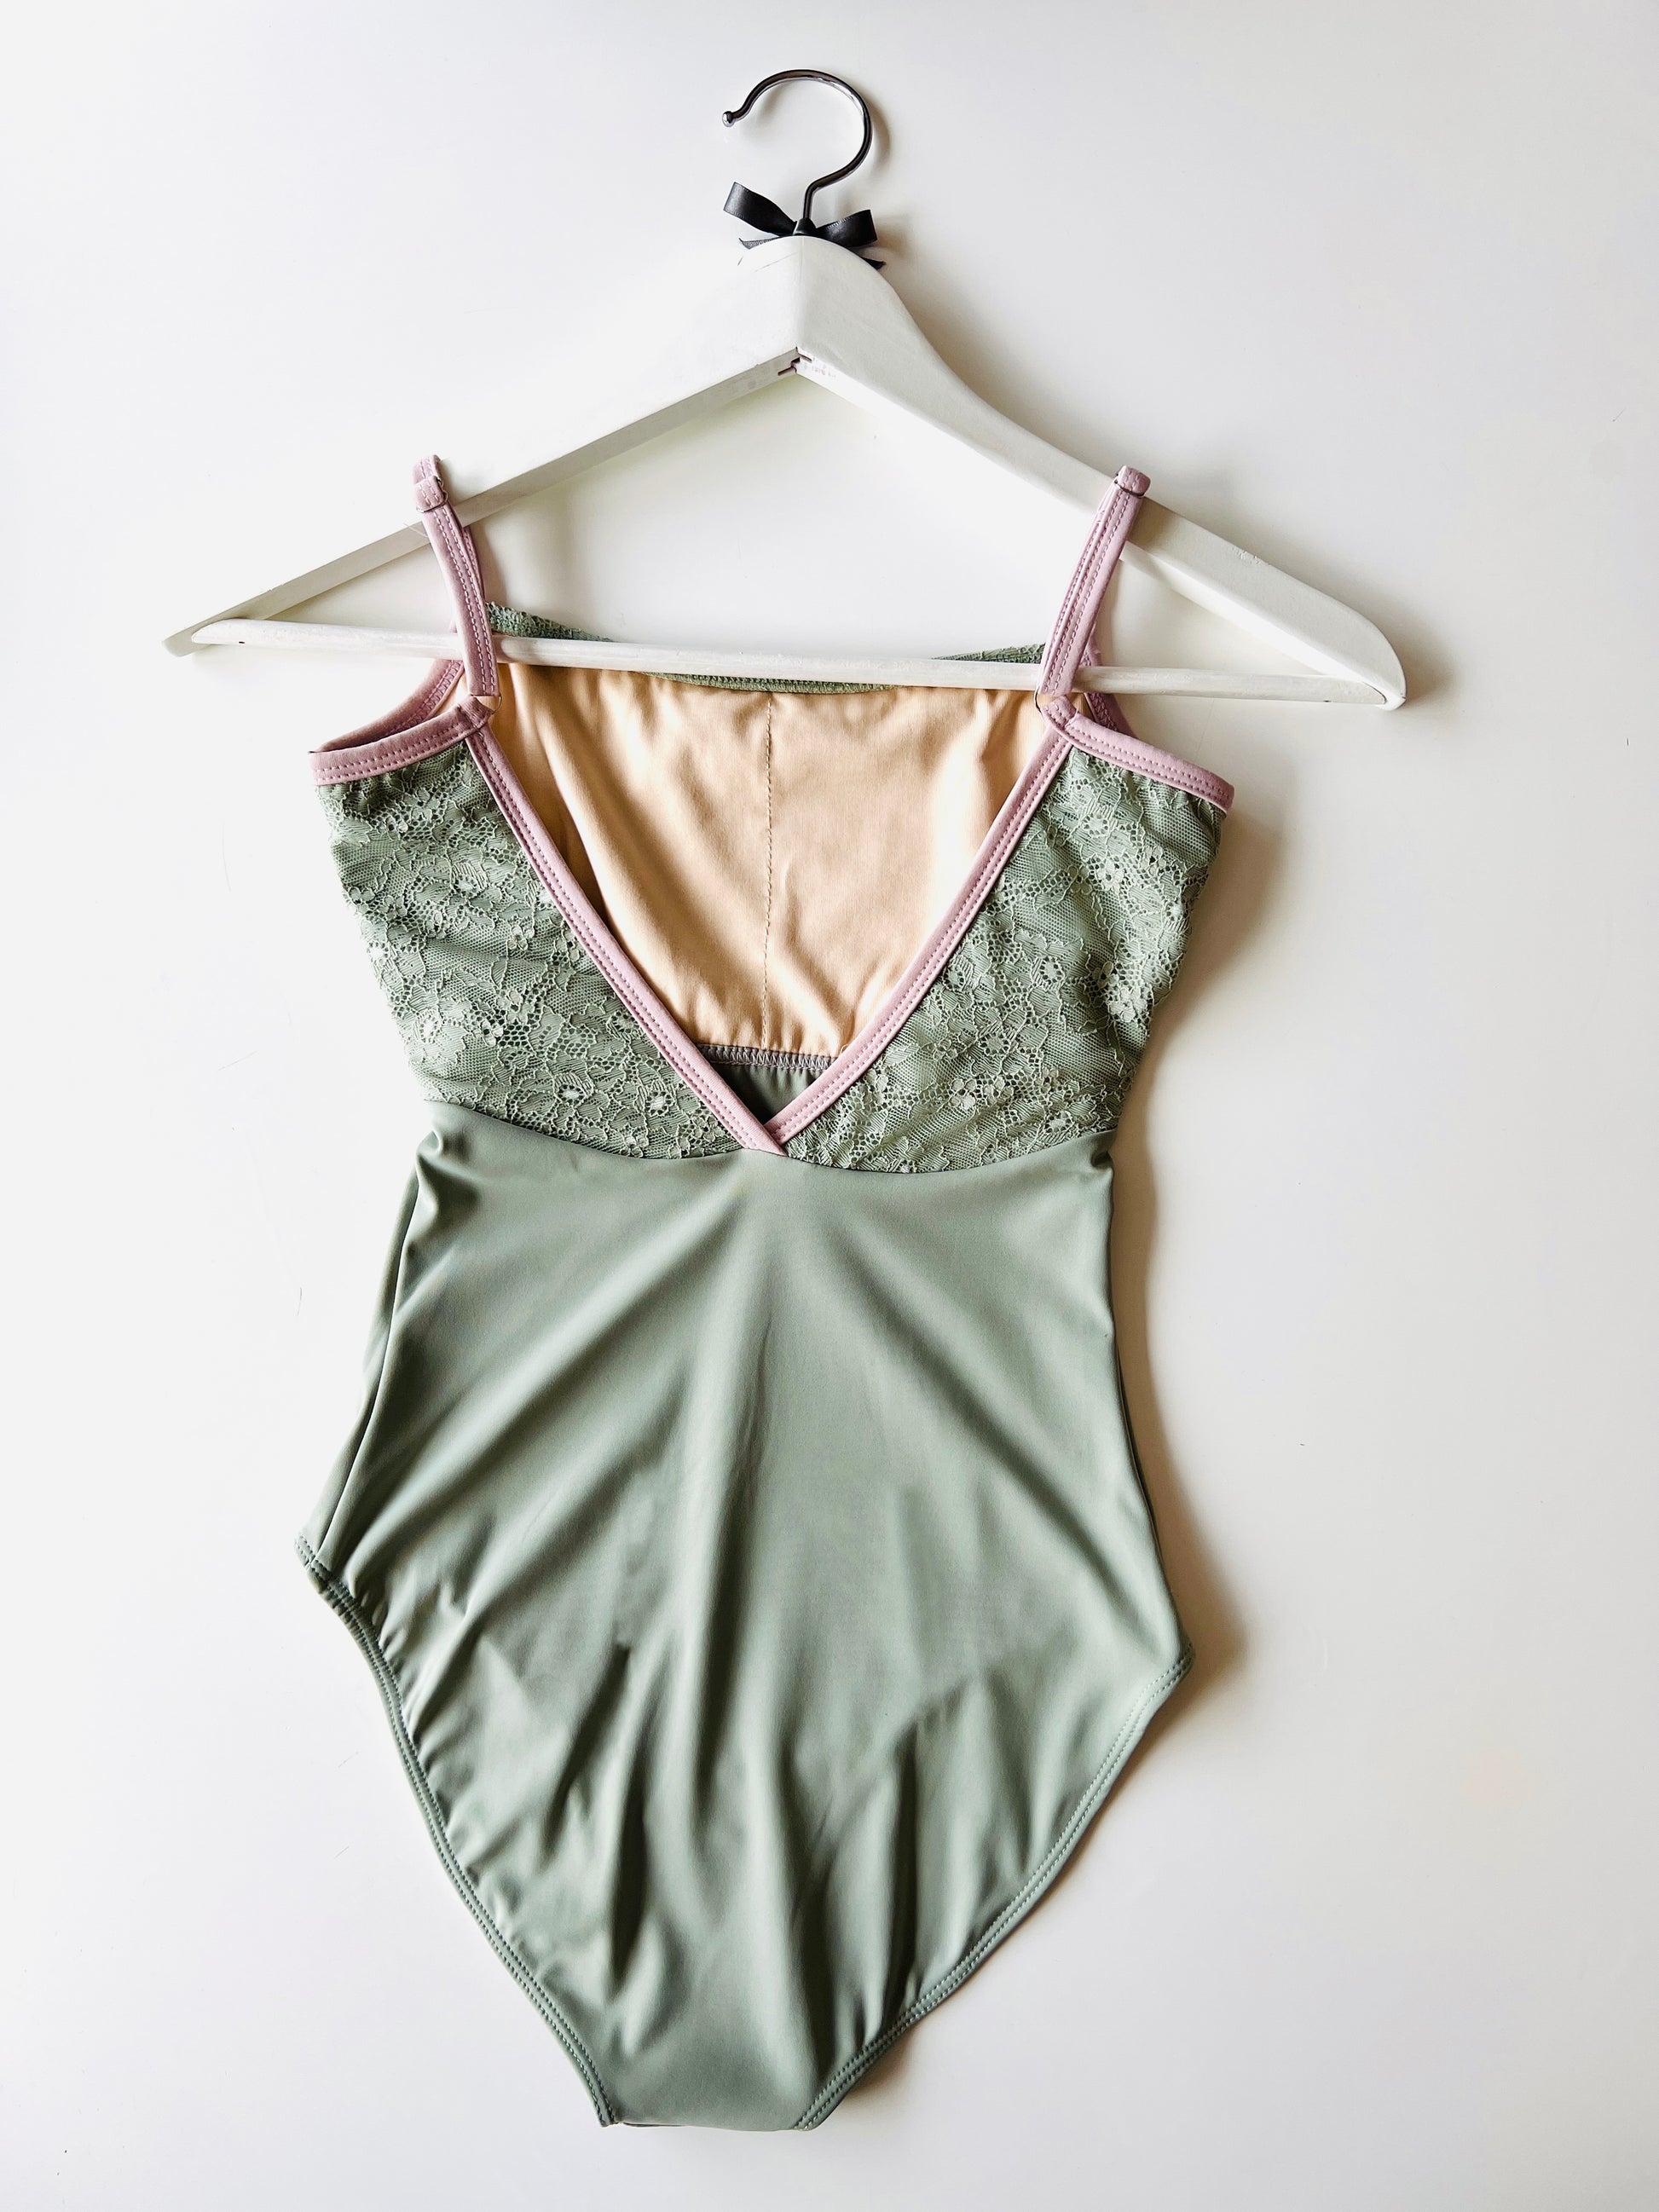 Lace top ballet leotard in sage green and contrasting lilac from The Collective Dancewear